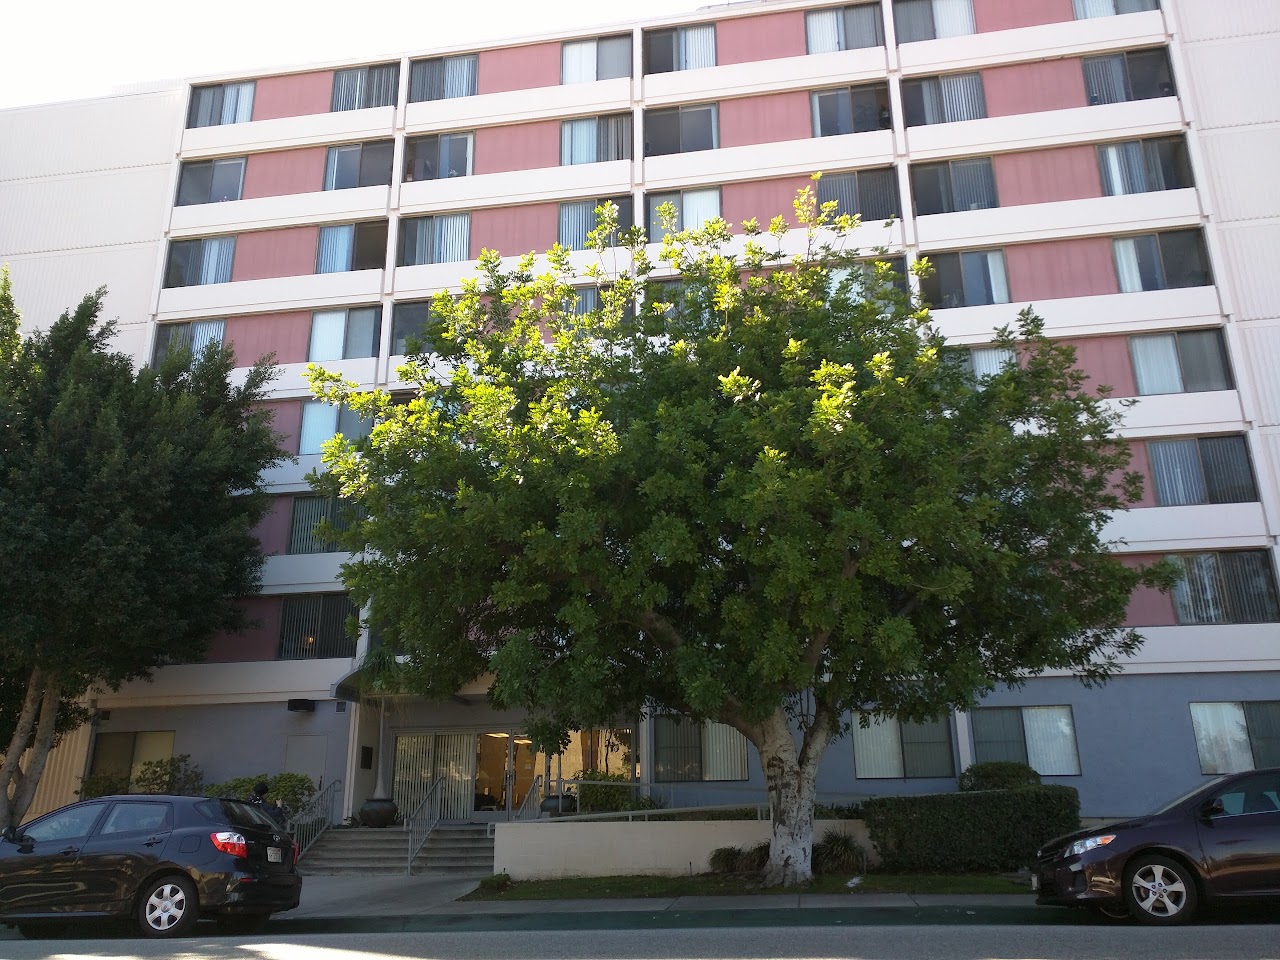 Photo of WYSONG VILLAGE APTS. Affordable housing located at 111 N CHAPEL AVE ALHAMBRA, CA 91801